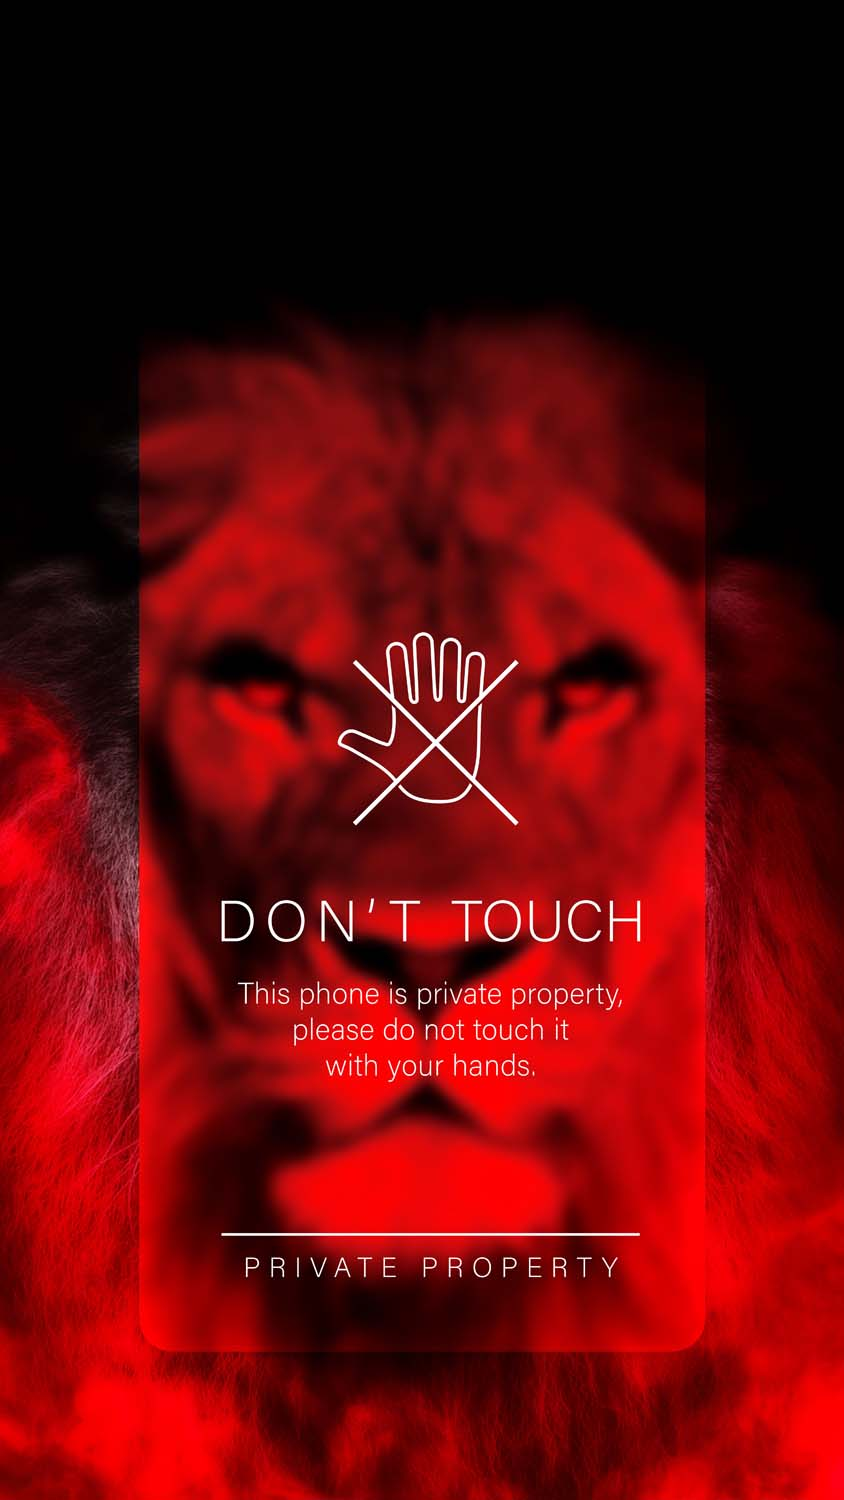 Do Not Touch Warning IPhone Wallpaper HD  IPhone Wallpapers